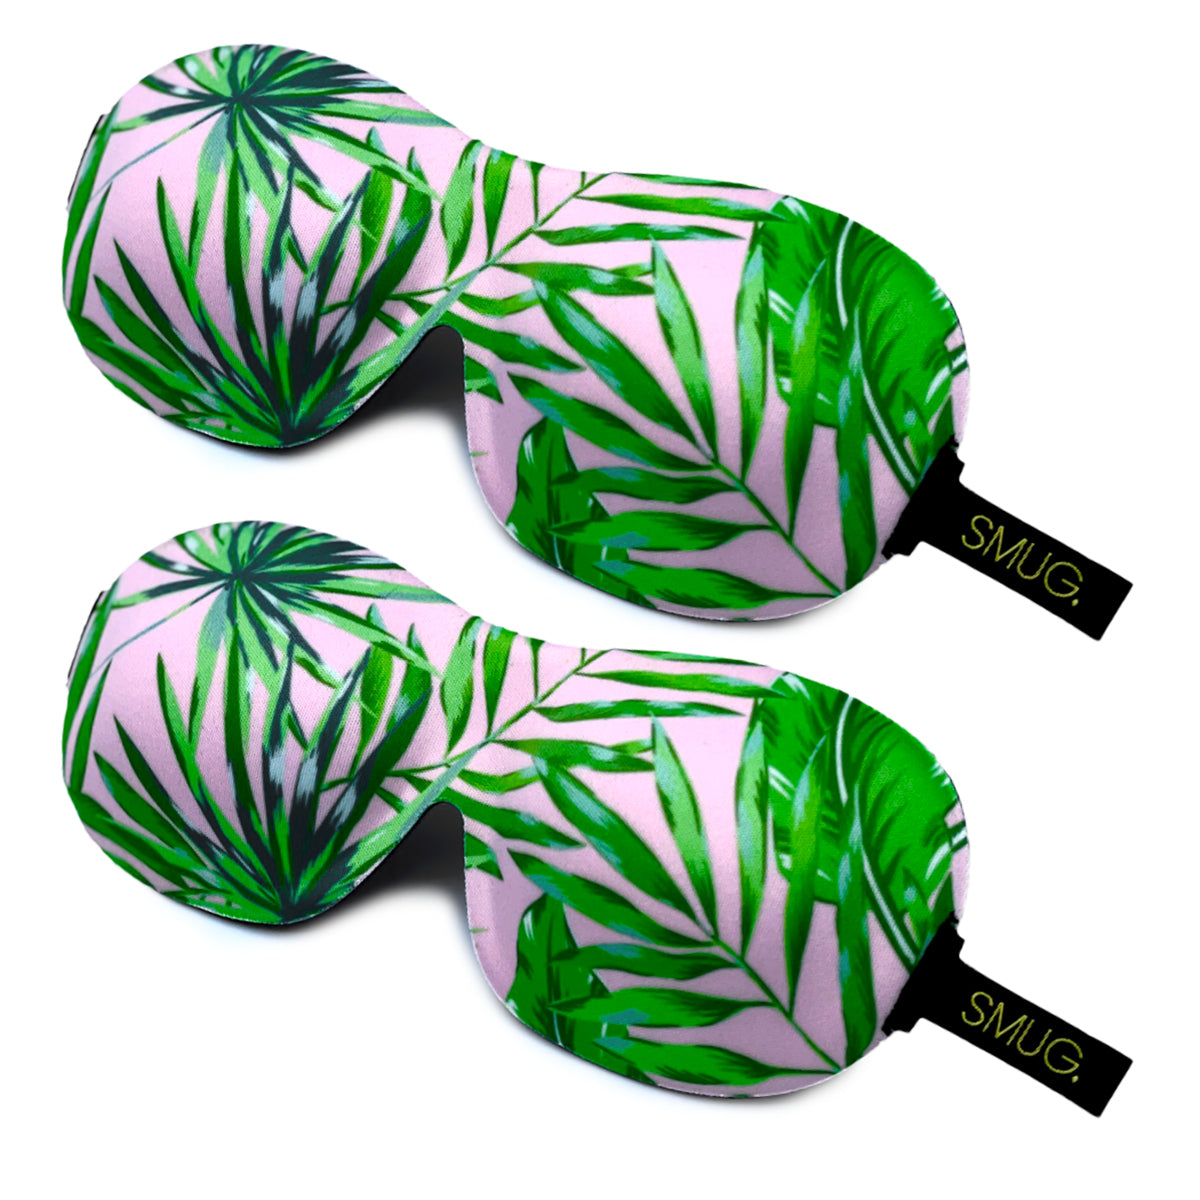 Contoured Sleep Mask Twin Pack Sets - Various Designs